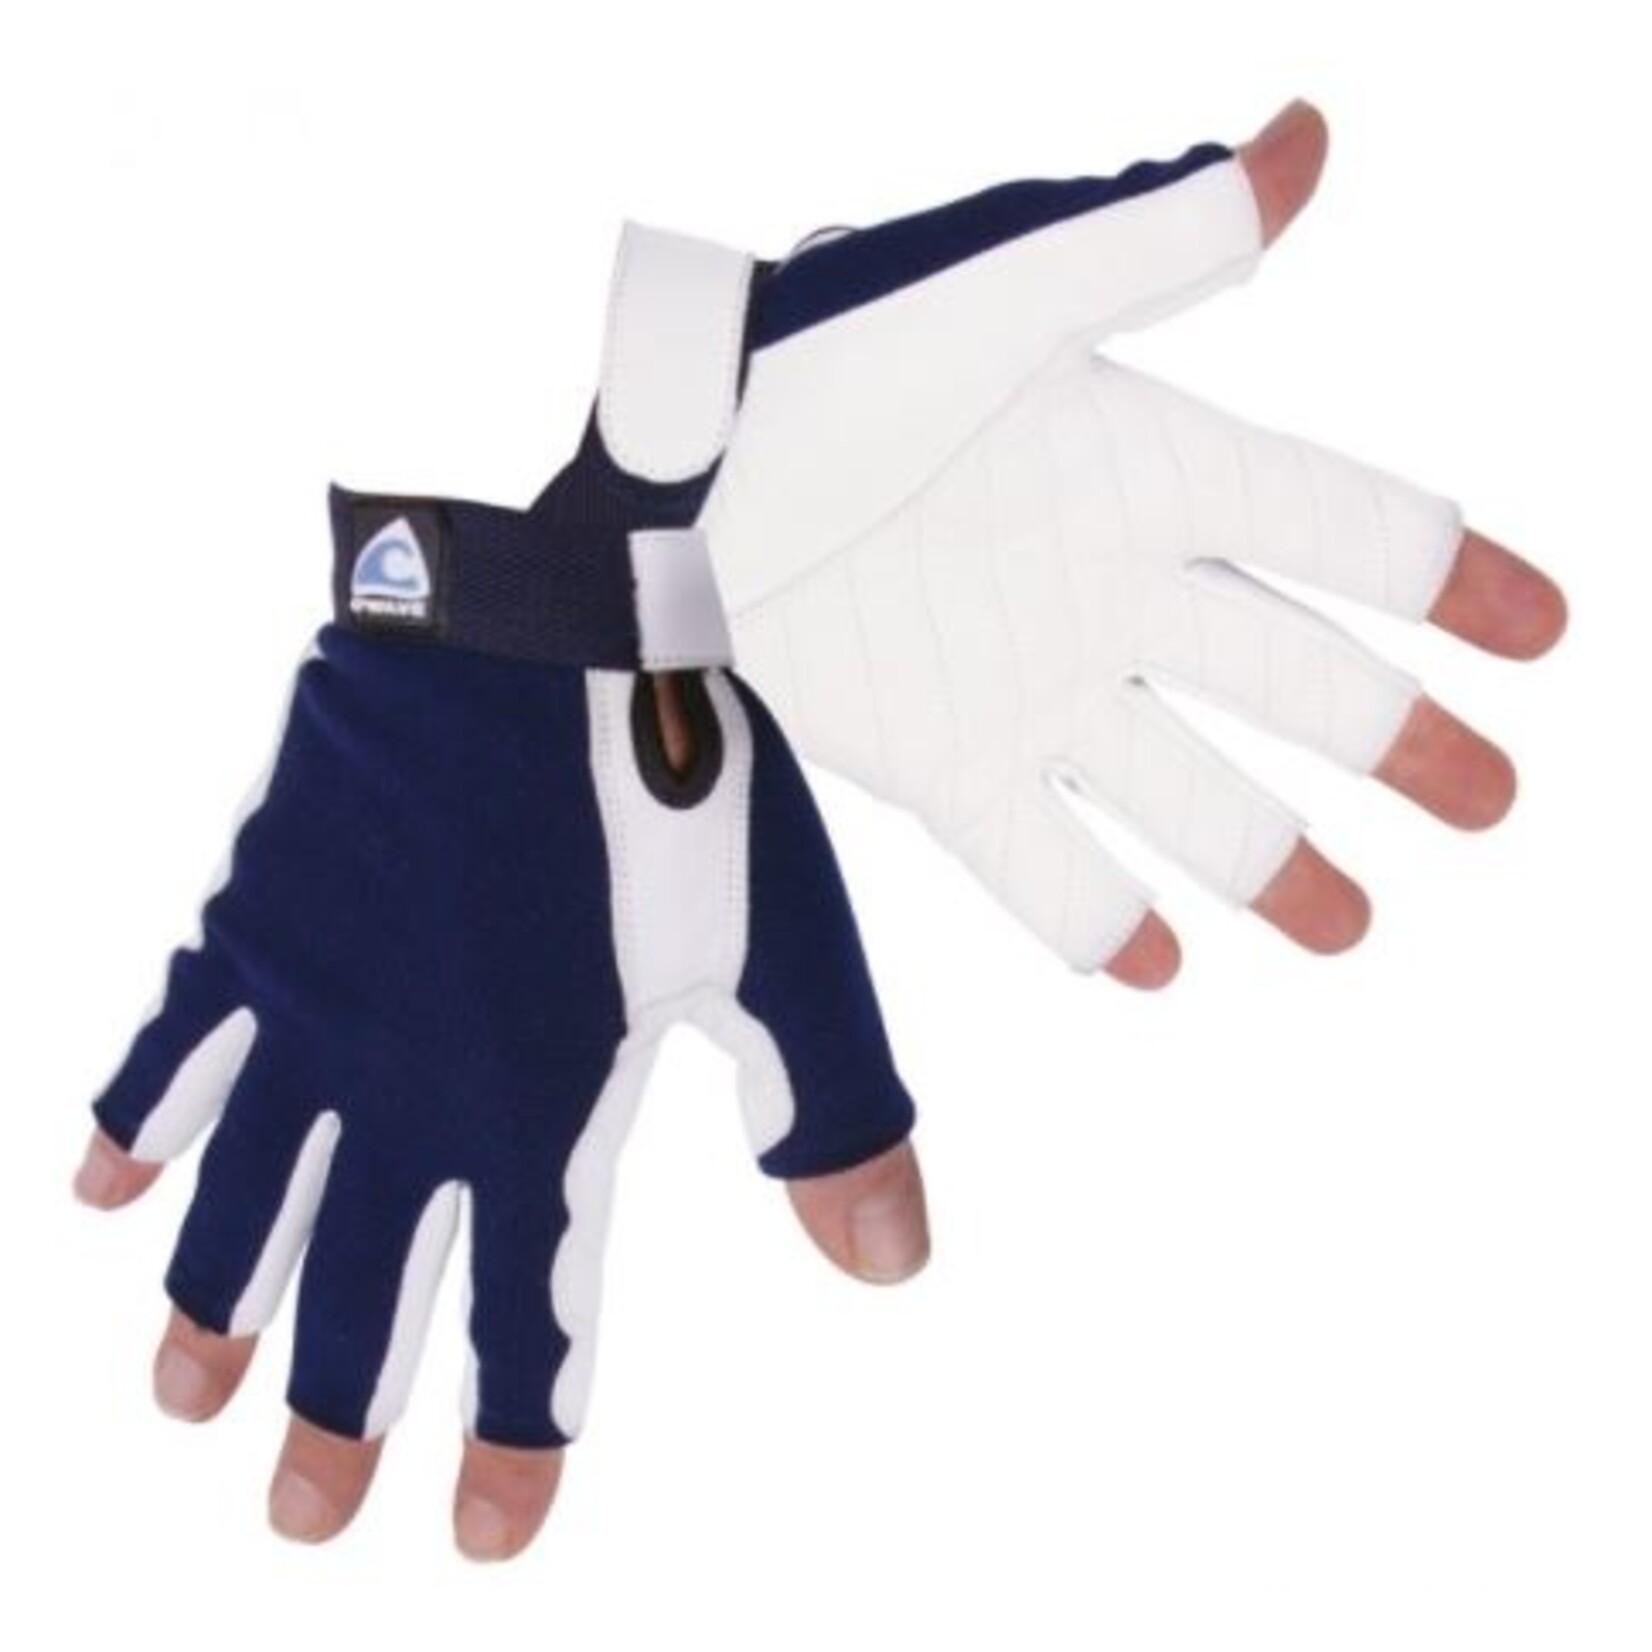 Plastimo O'wave gloves first+ 5dc xl